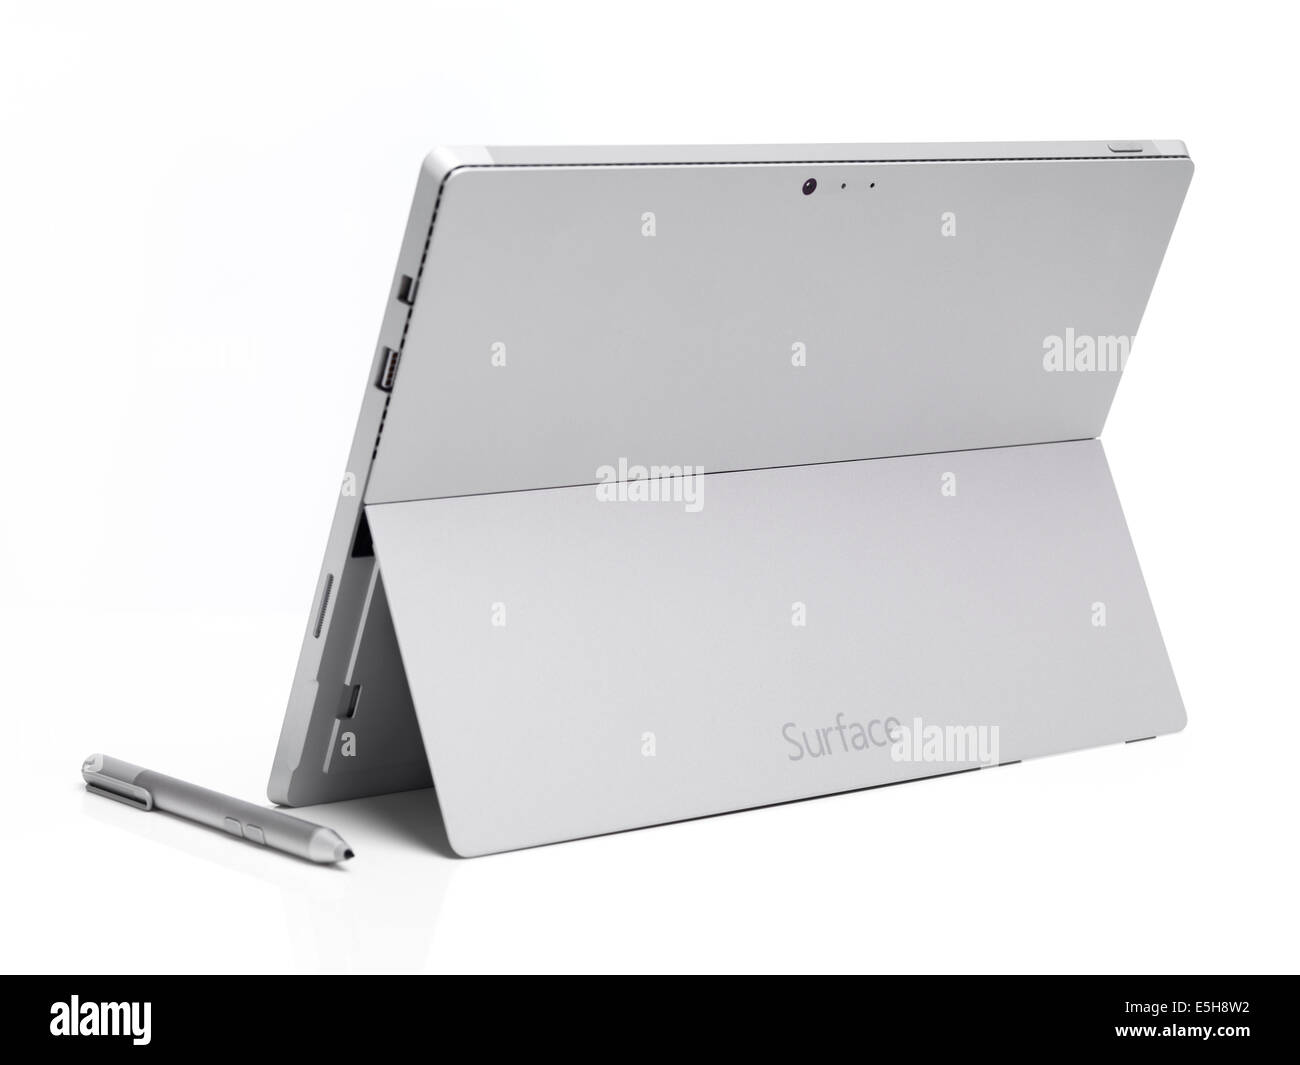 Microsoft Surface Pro 3 tablet computer rear view isolated on white background Stock Photo